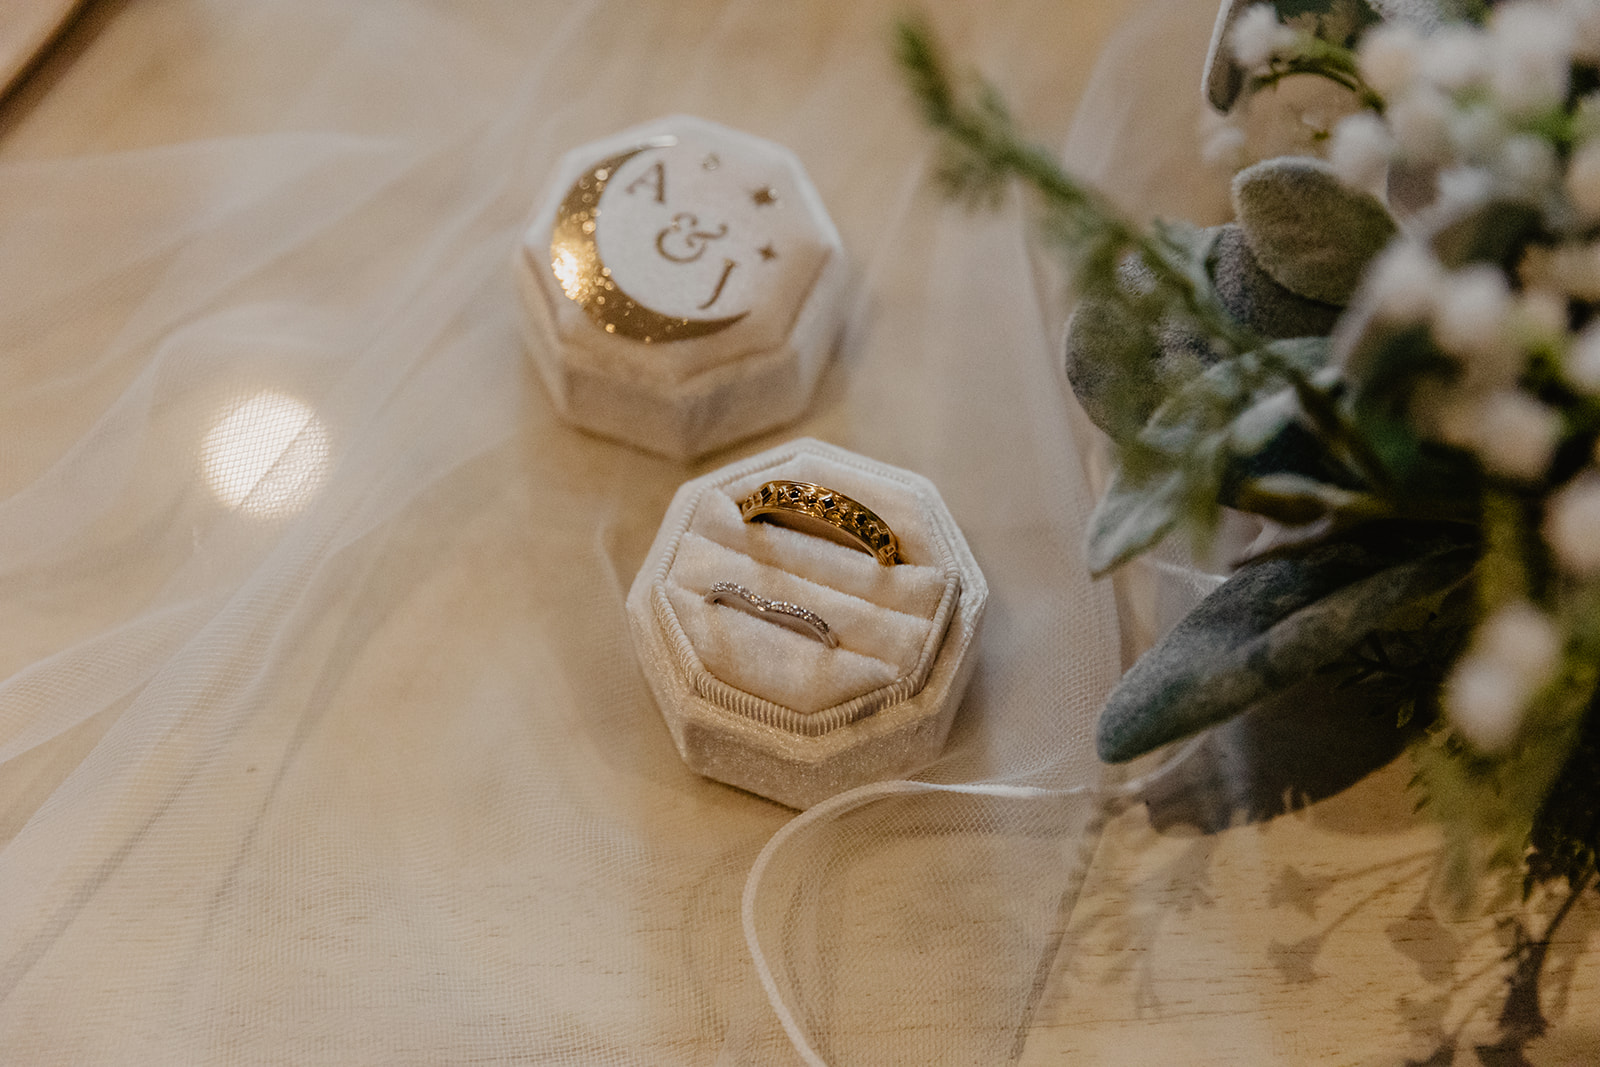 Wedding rings at a Long Furlong Barn Wedding in Worthing, Sussex. By Olive Joy Photography.